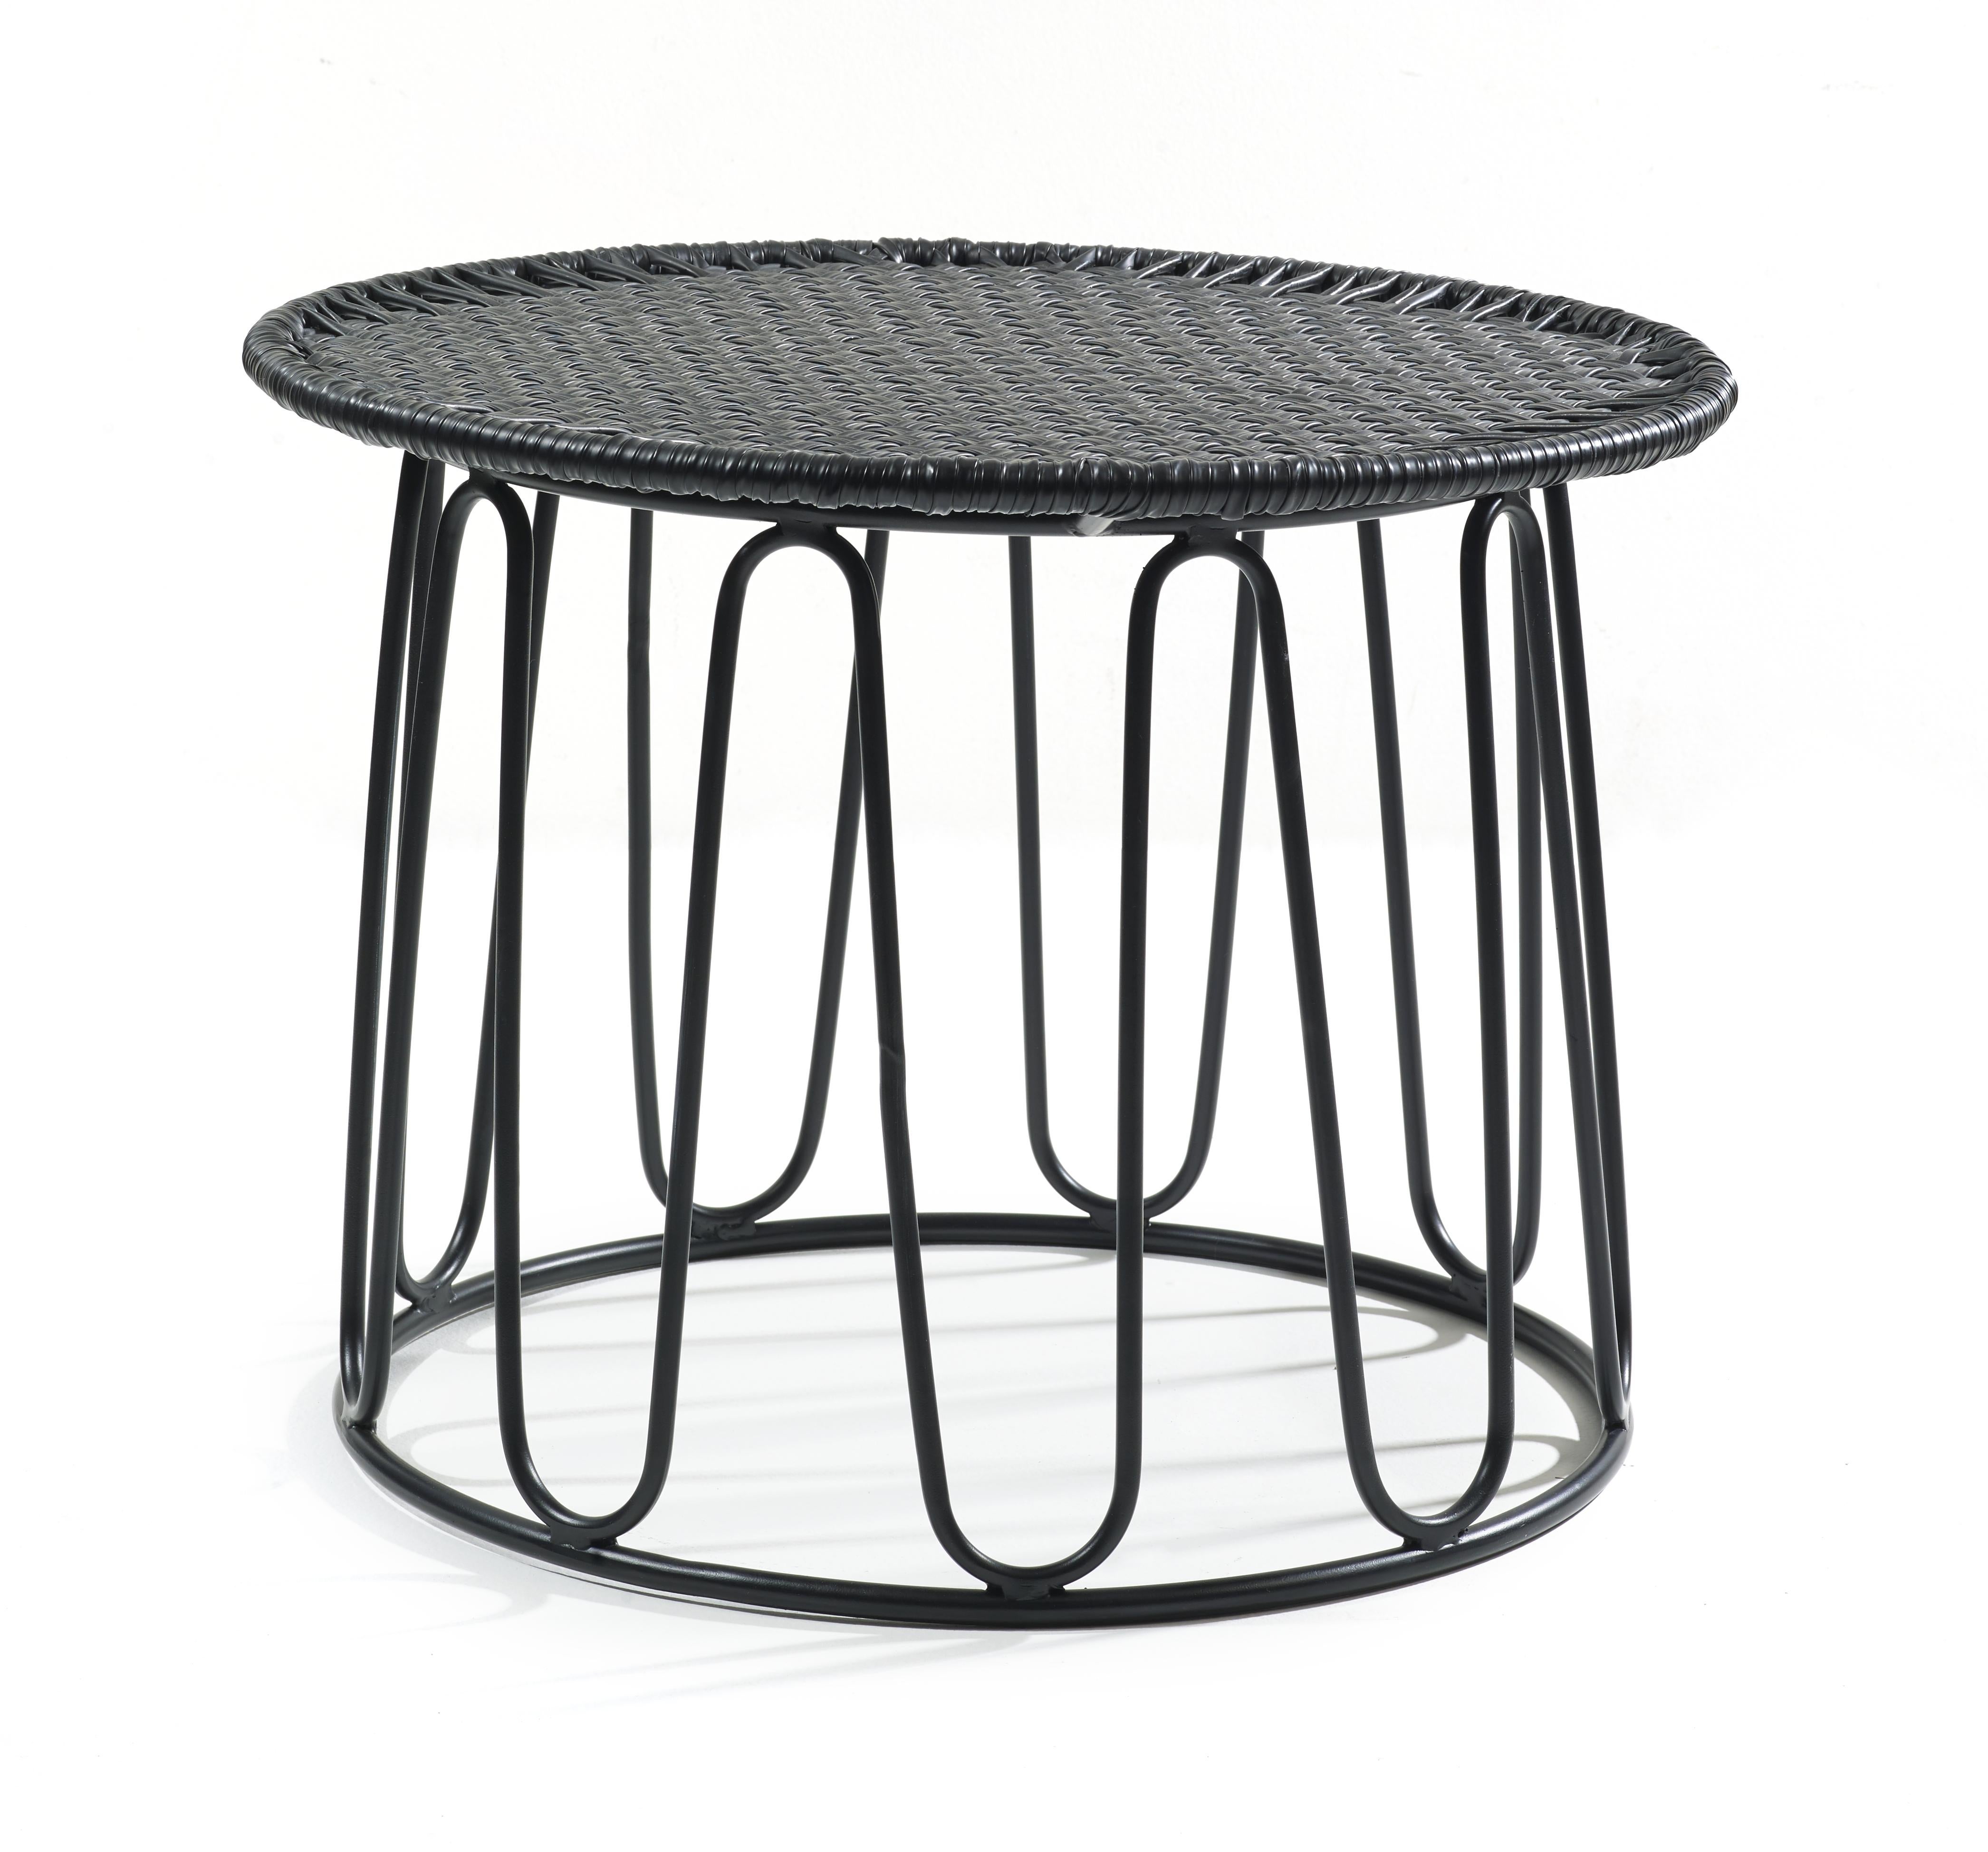 Black circo side table by Sebastian Herkner.
Materials: Galvanized and powder-coated tubular steel. PVC strings.
Technique: Made from recycled plastic. Weaved by local craftspeople in Colombia. 
Dimensions: 
Top diameter 55 cm 
Base diameter 51